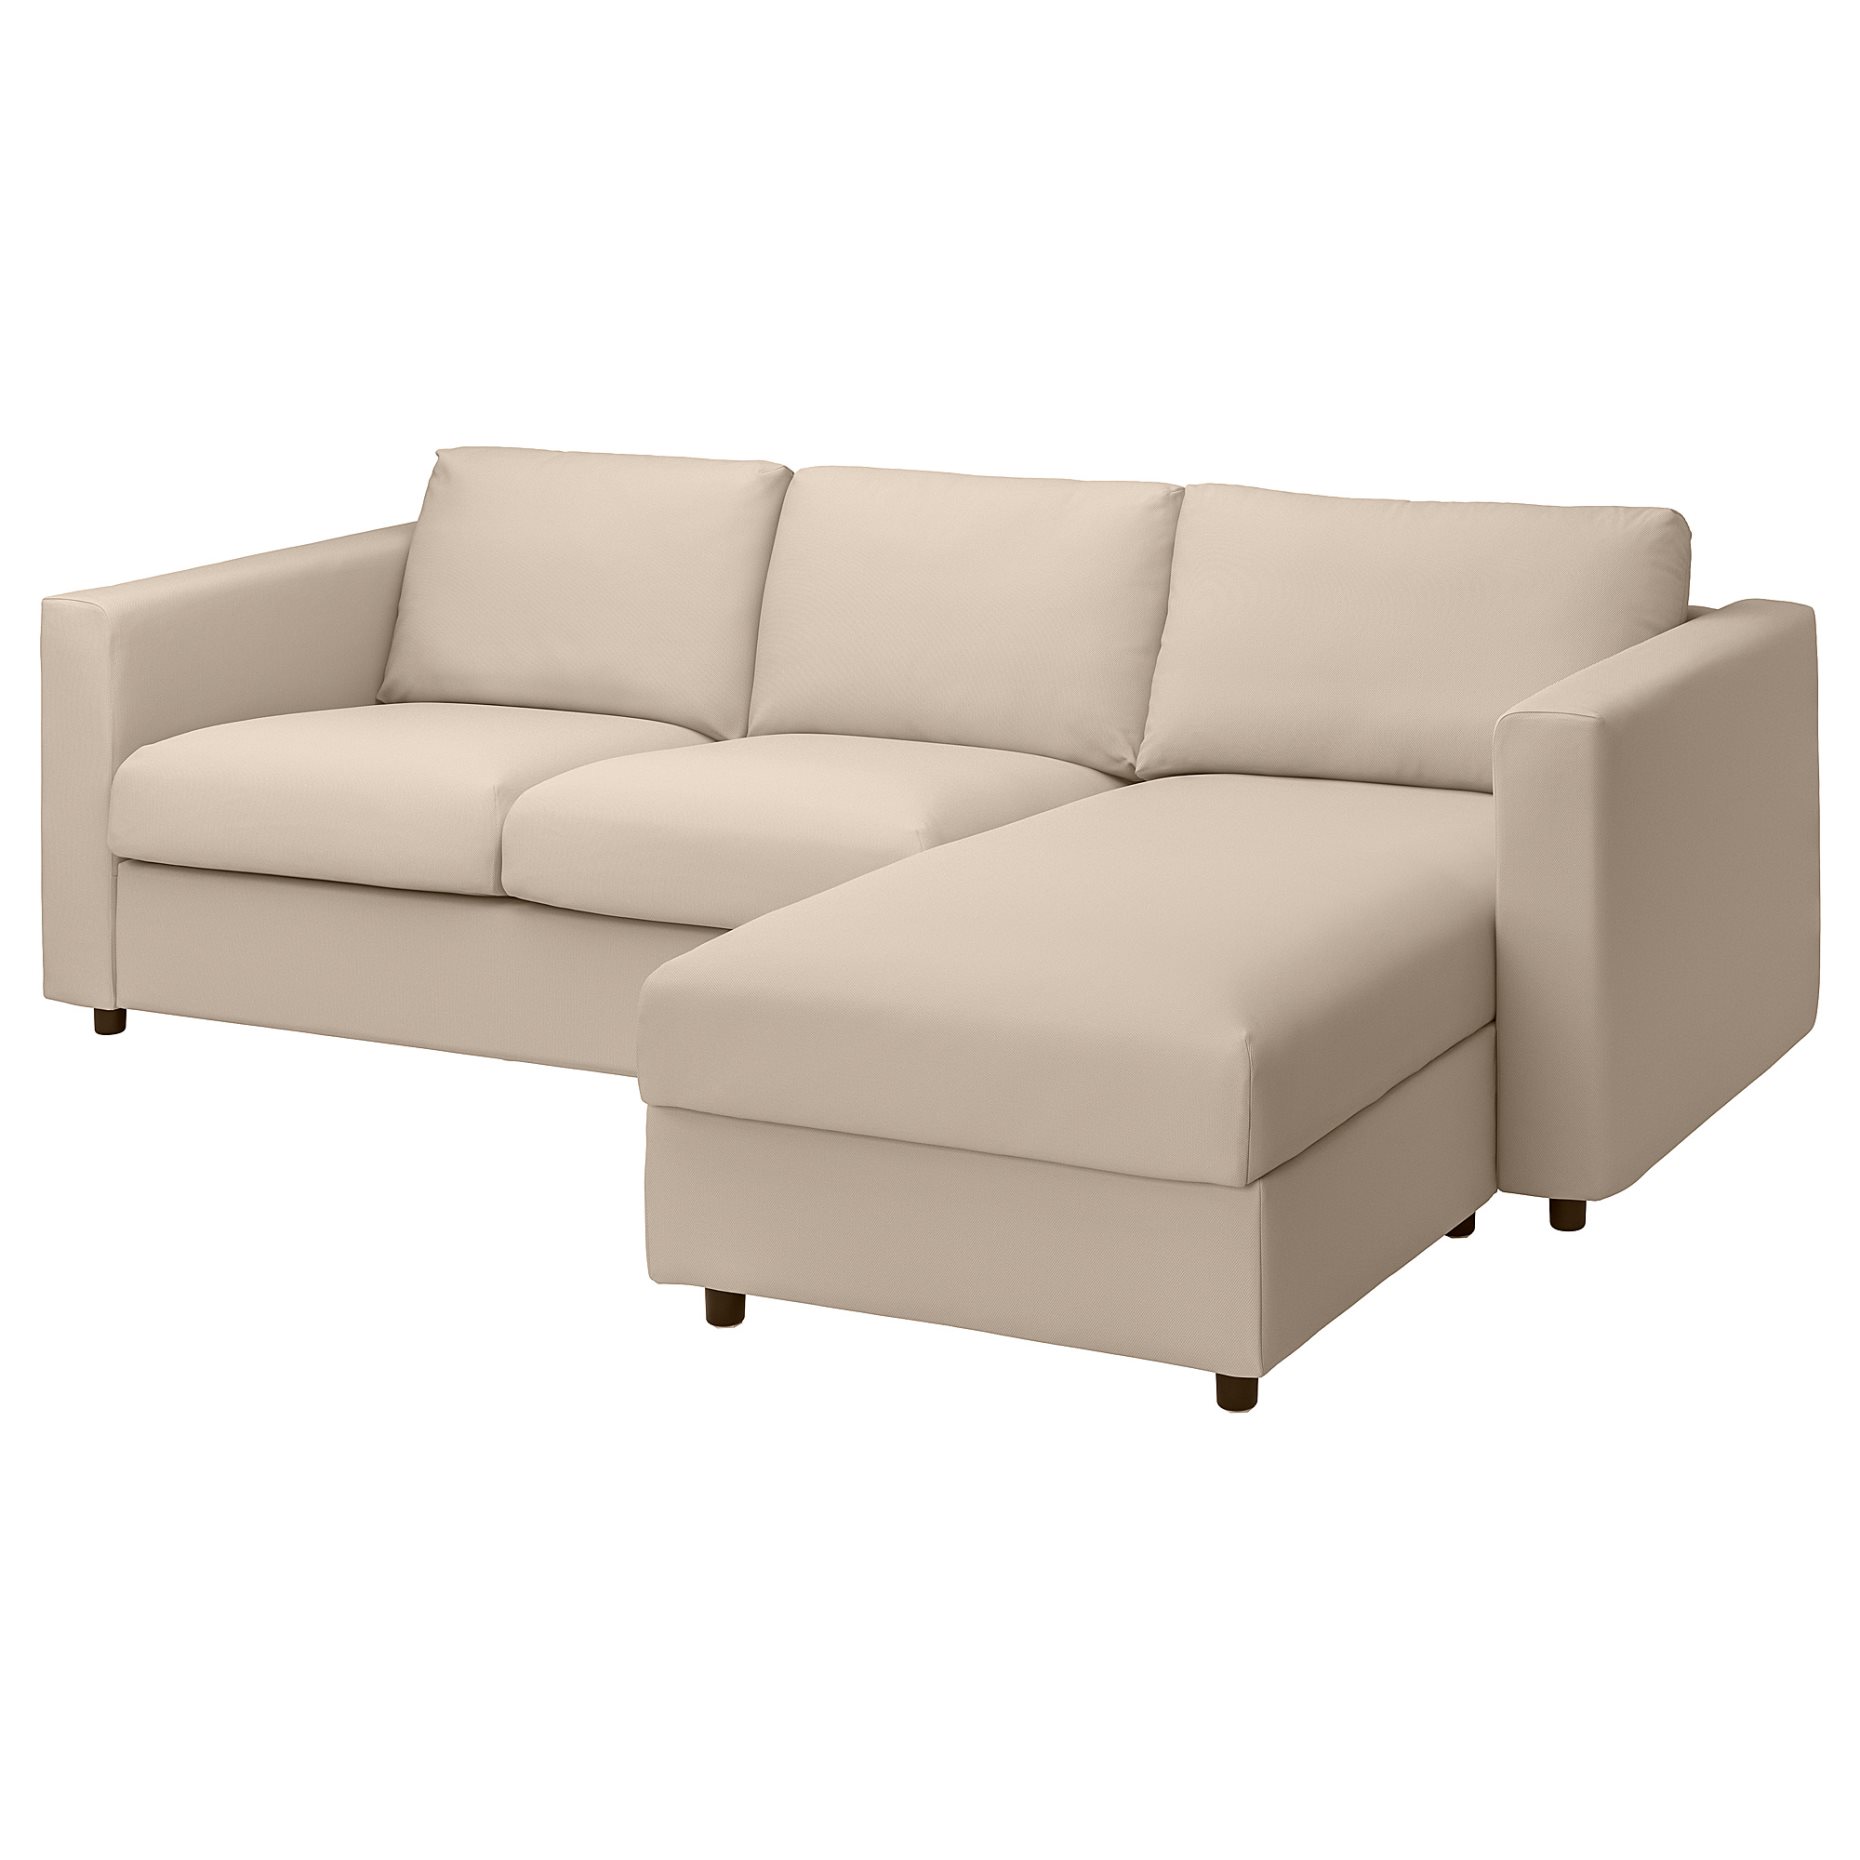 VIMLE, 3-seat sofa with chaise longue, 193.991.27